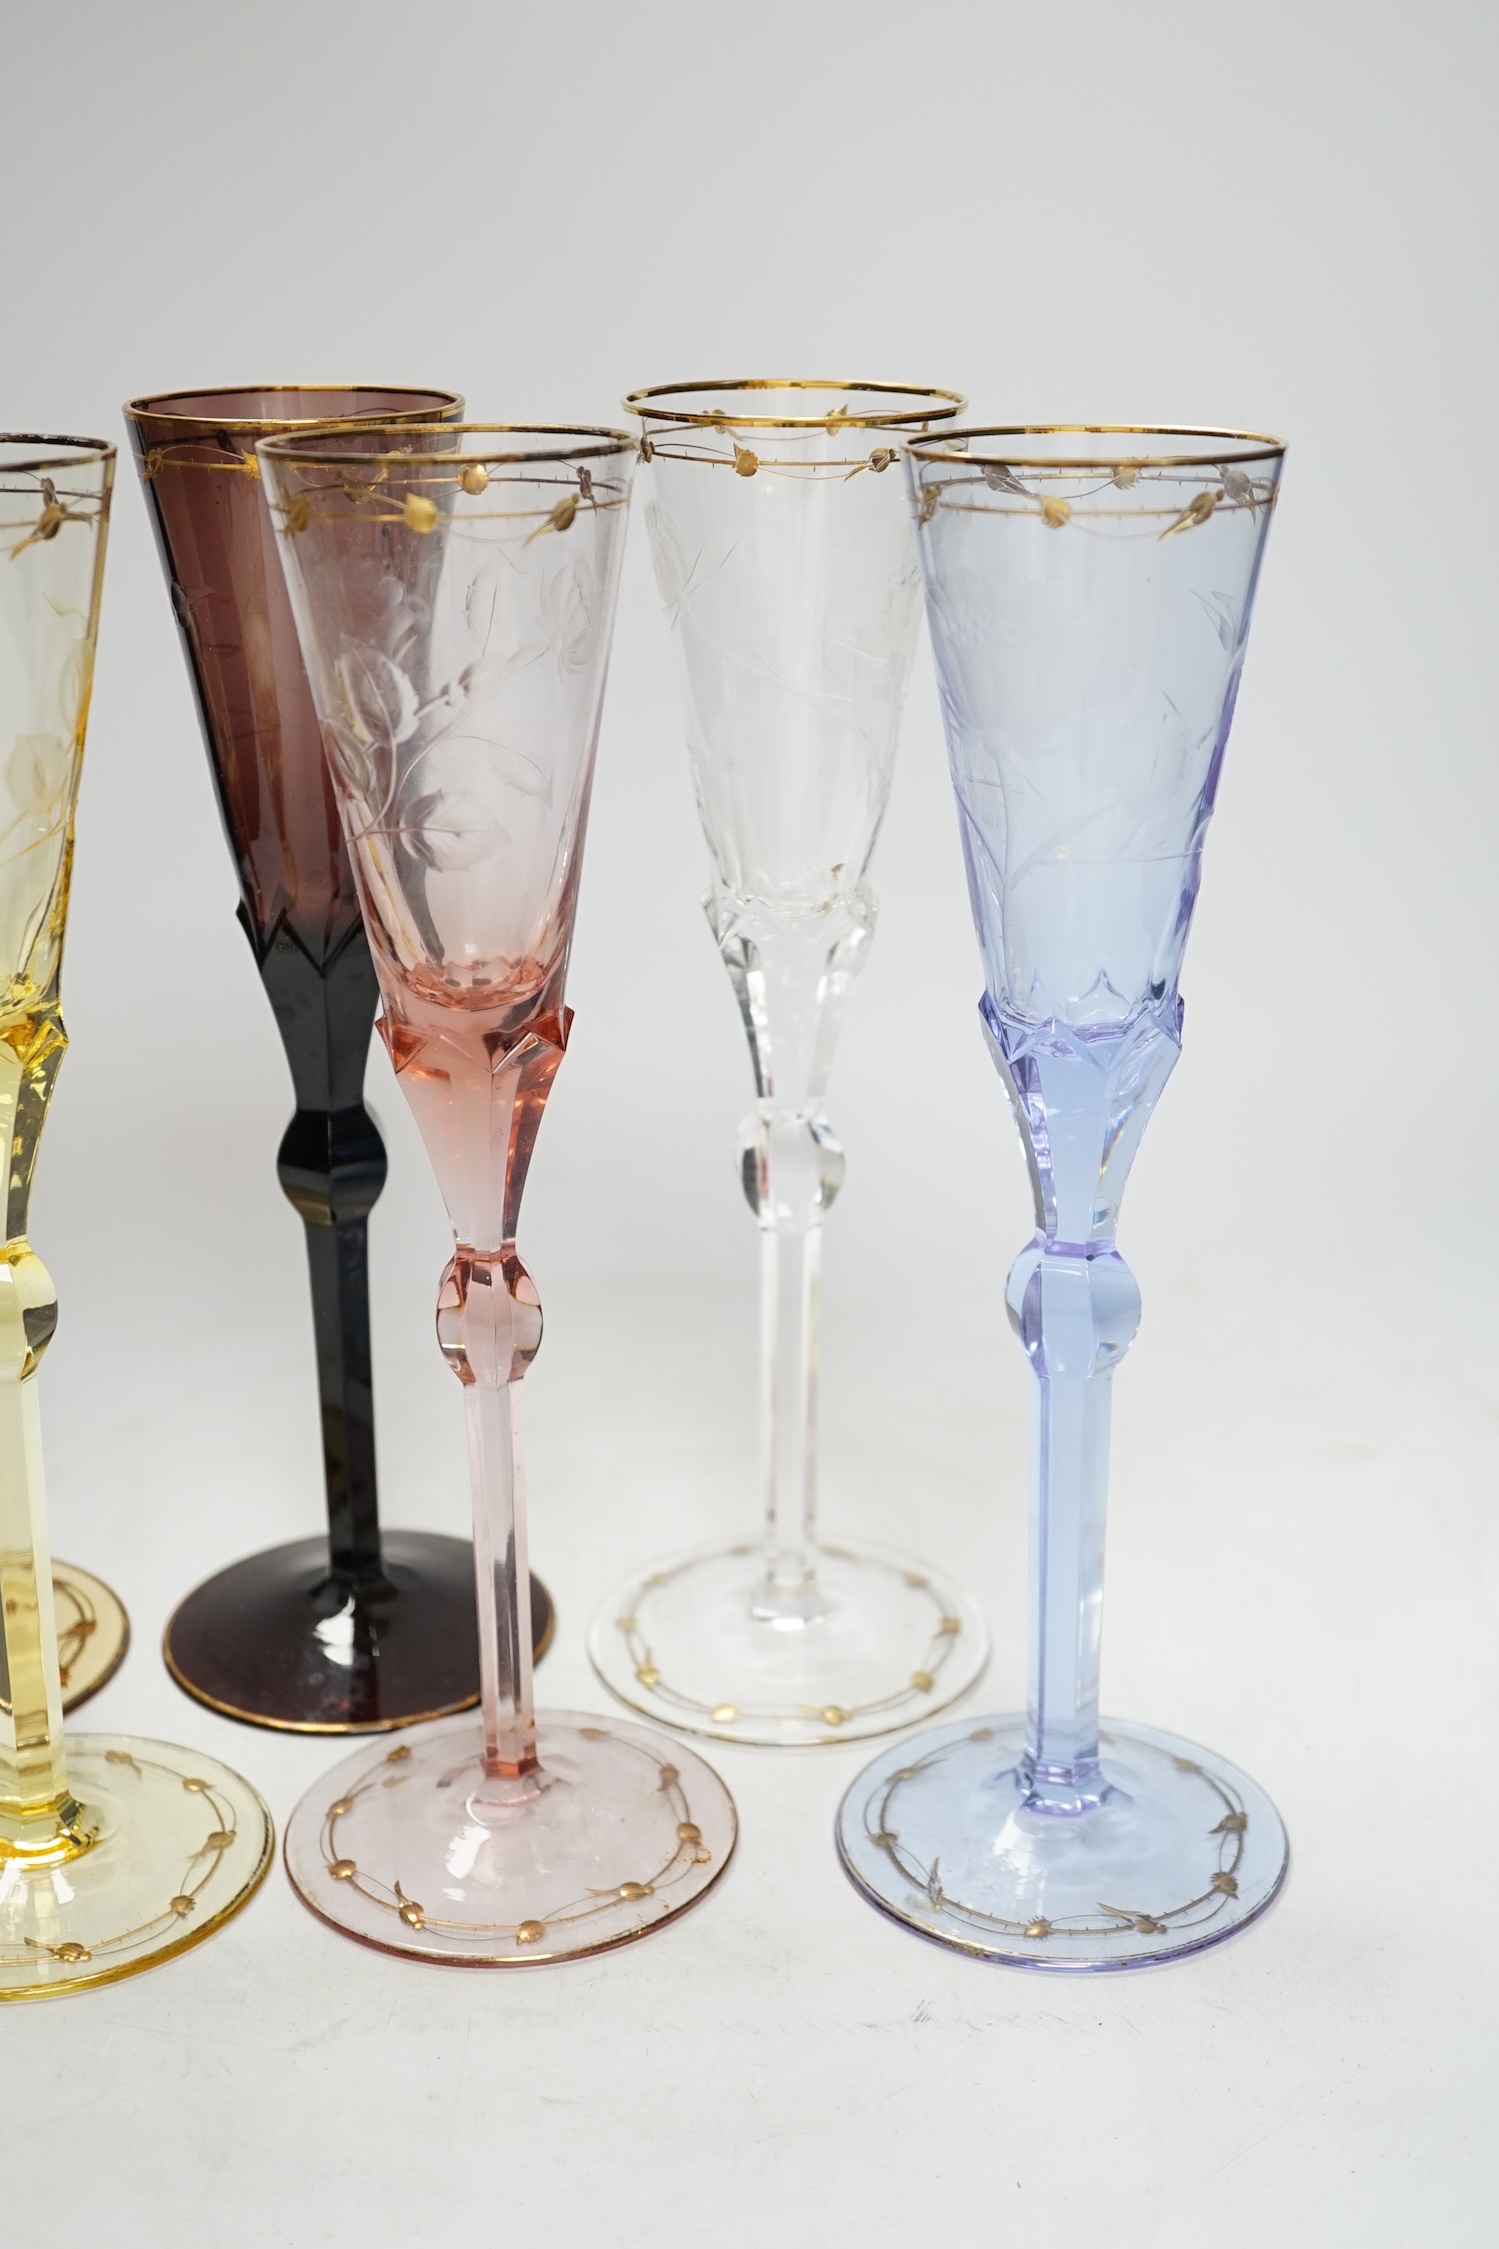 A set of six coloured Moser engraved and gilt enamelled, champagne flutes, 27cm high